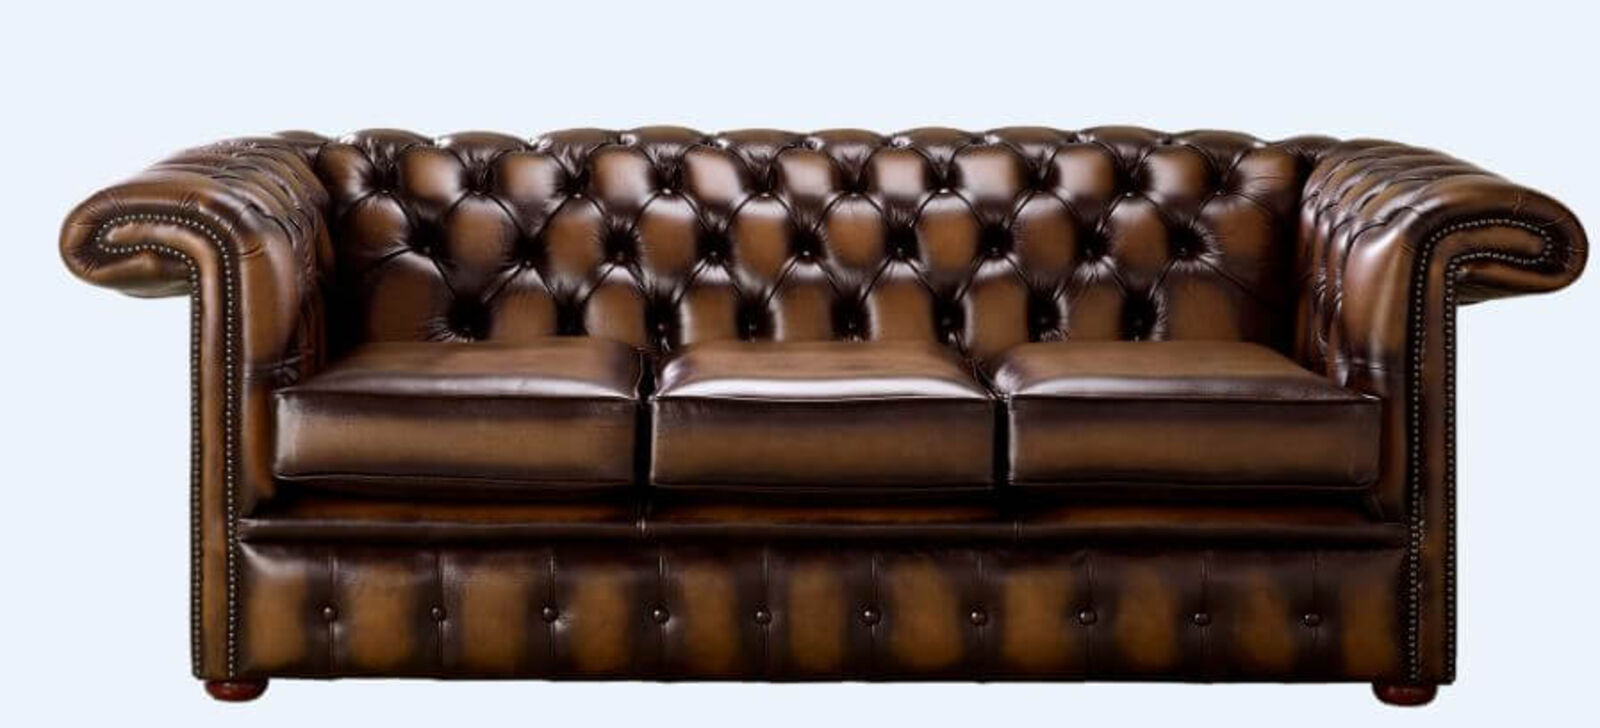 Product photograph of Chesterfield 1857 Hockey Stick 3 Seater Antique Autumn Tan Leather Sofa Offer from Designer Sofas 4U